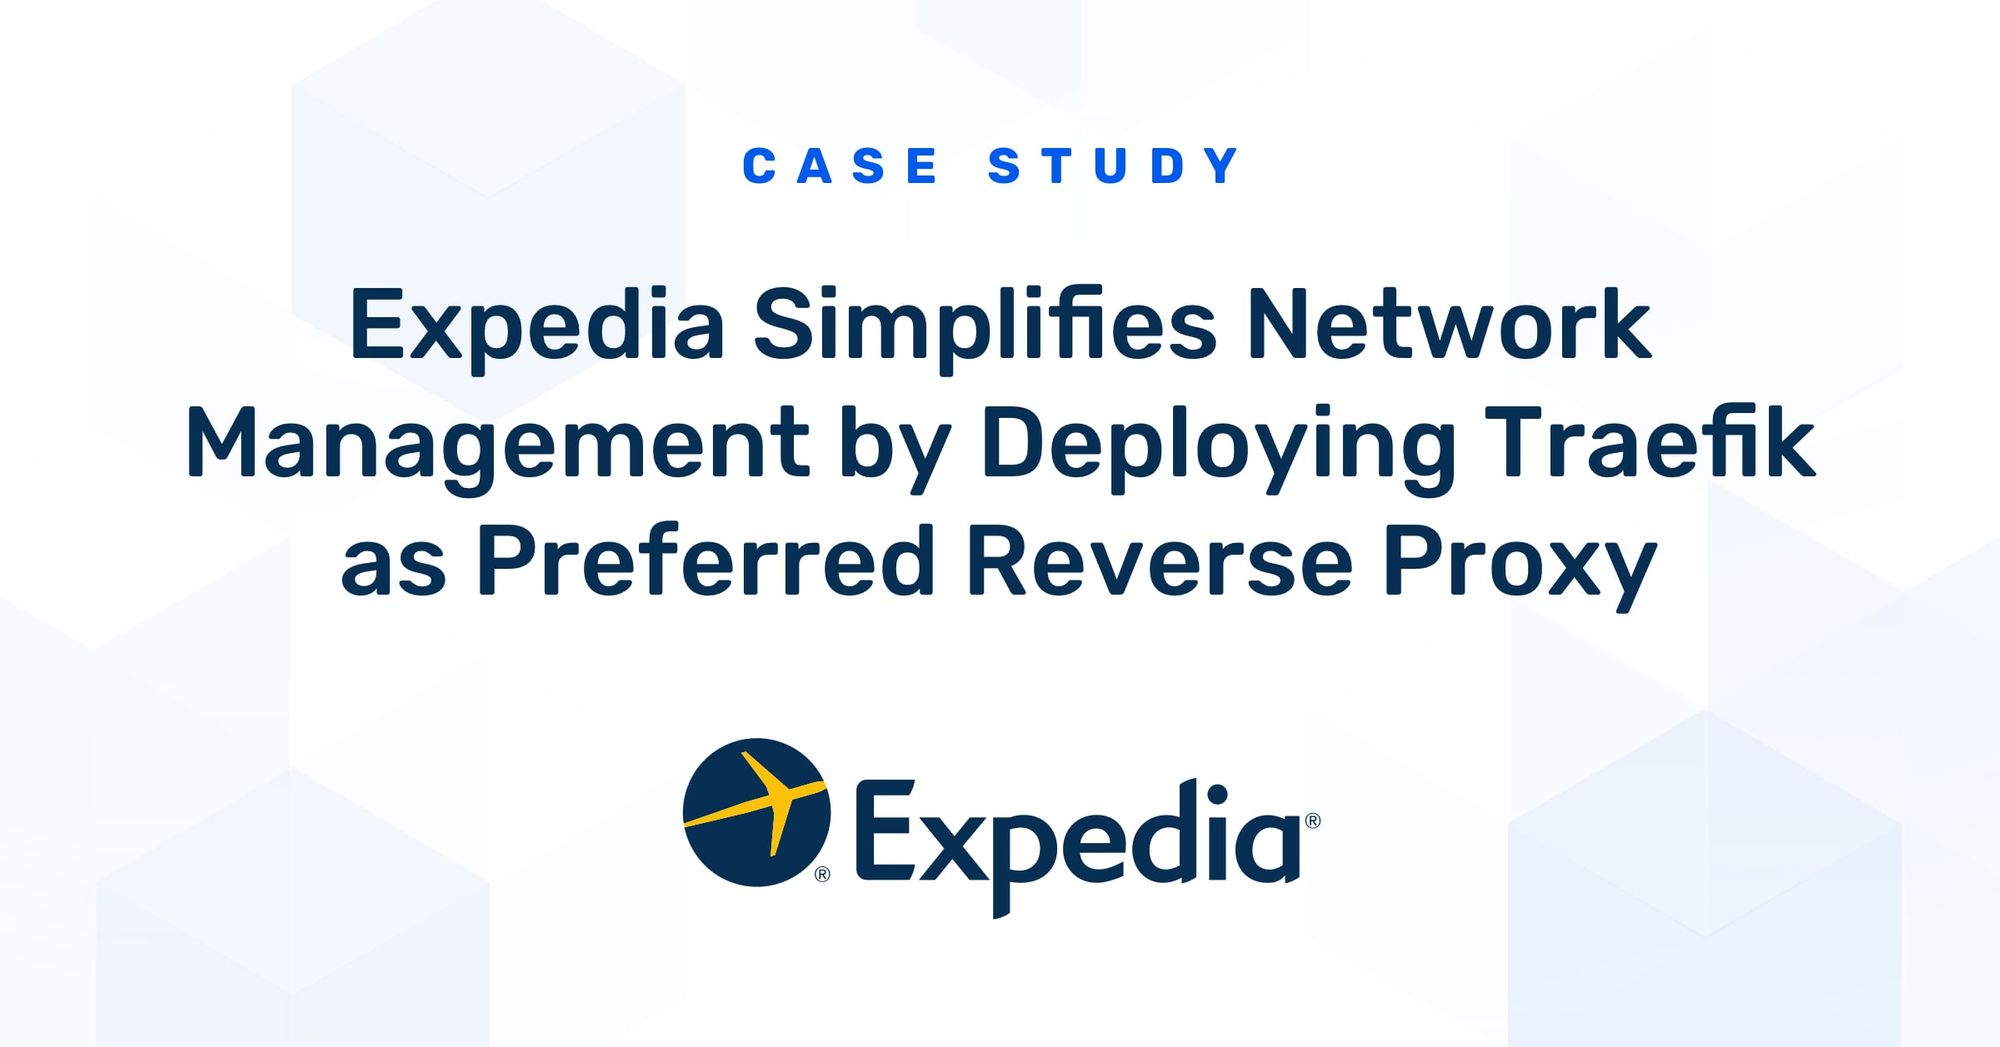 Expedia Simplifies Network Management by Deploying Traefik as Preferred Reverse Proxy